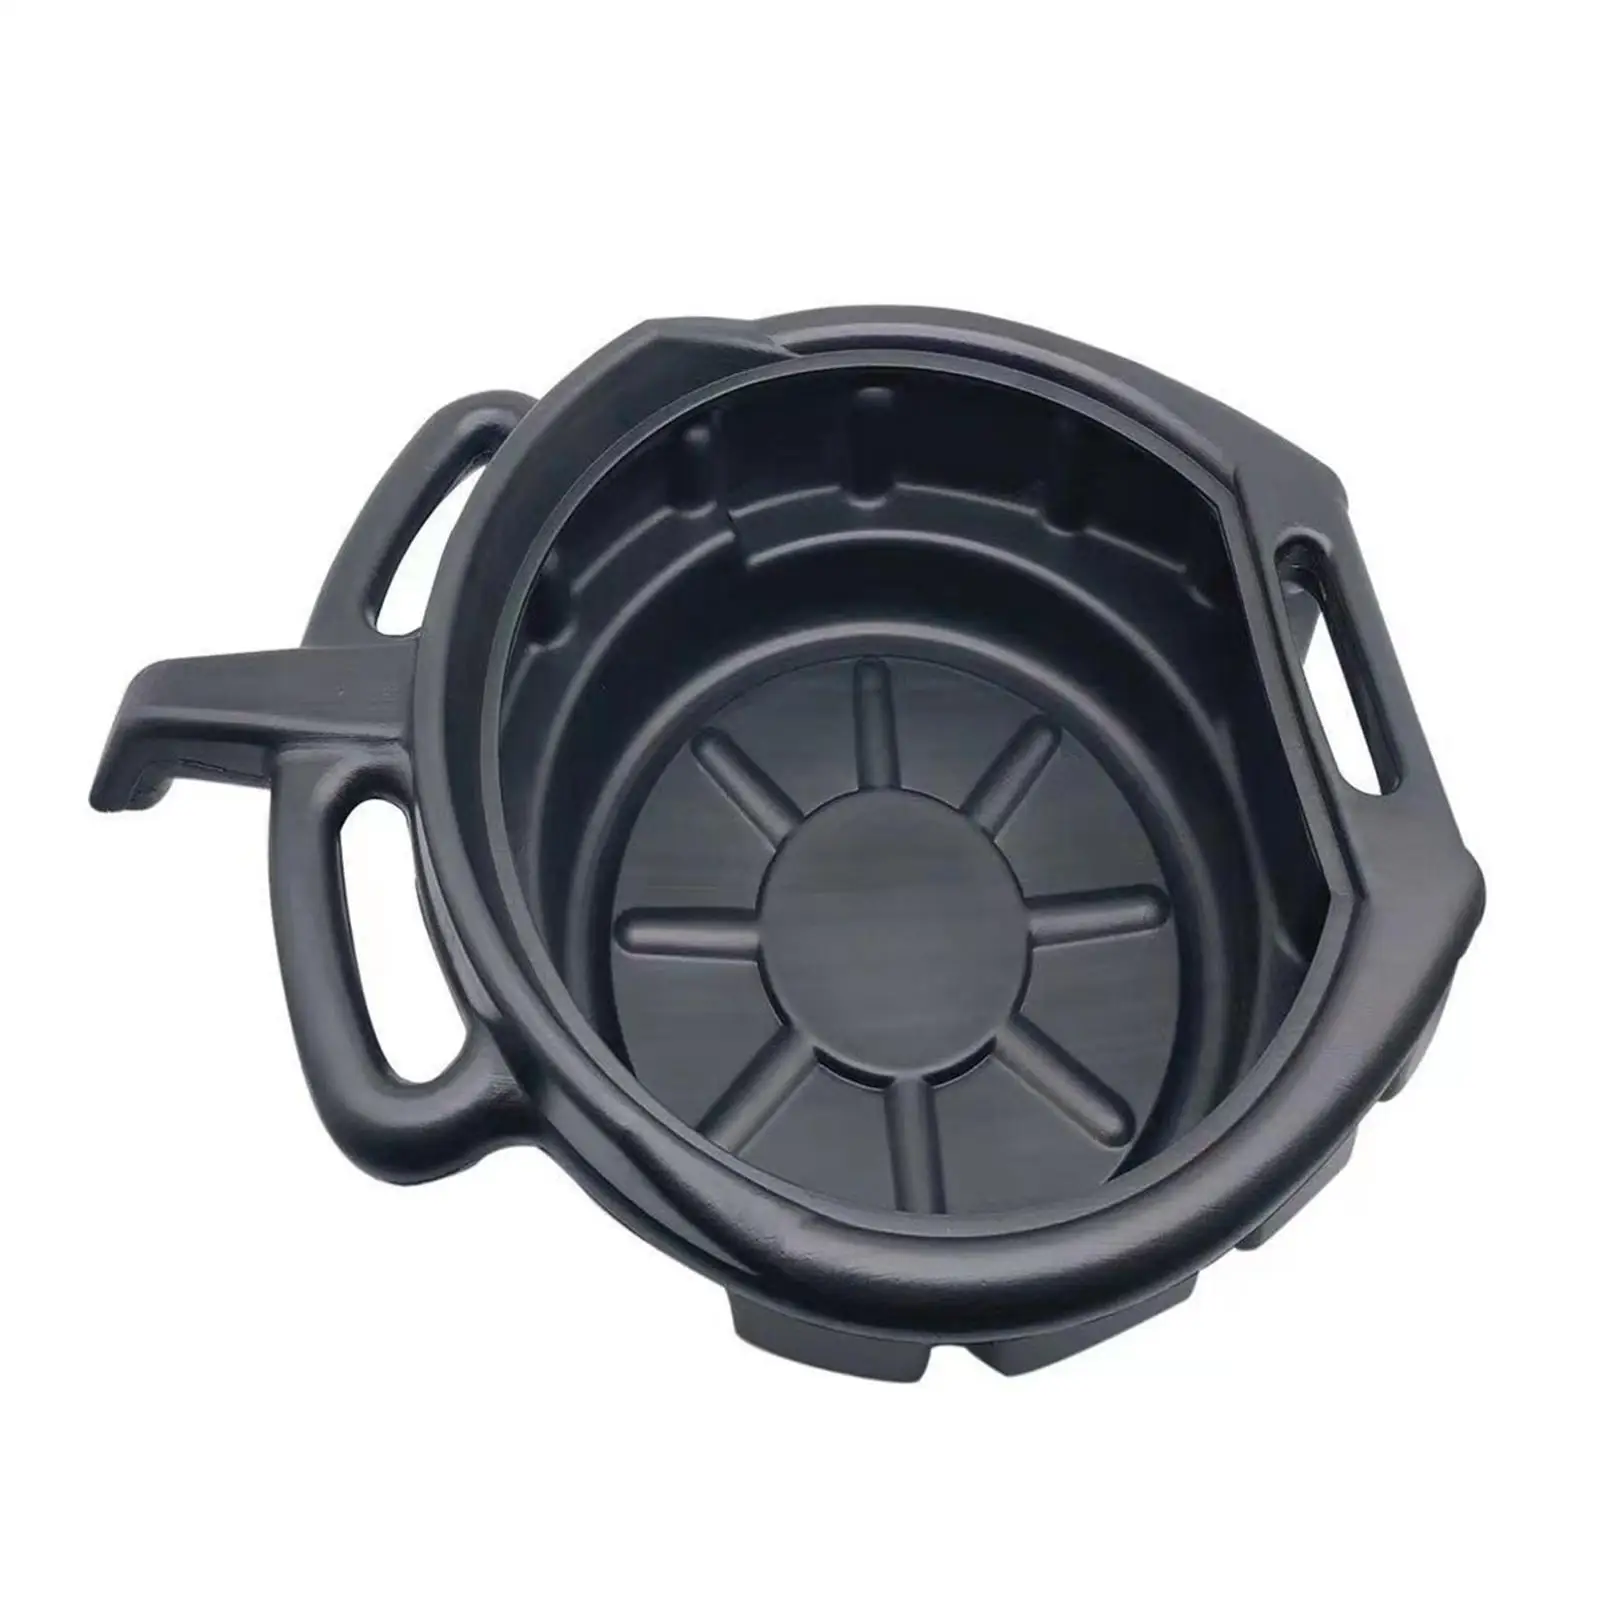 Oil Drain Container Can Multifunction 10L Oil Catches Can Reservoir Tank Oil Trip Tray for Workshop Car Vehicle Truck Boat